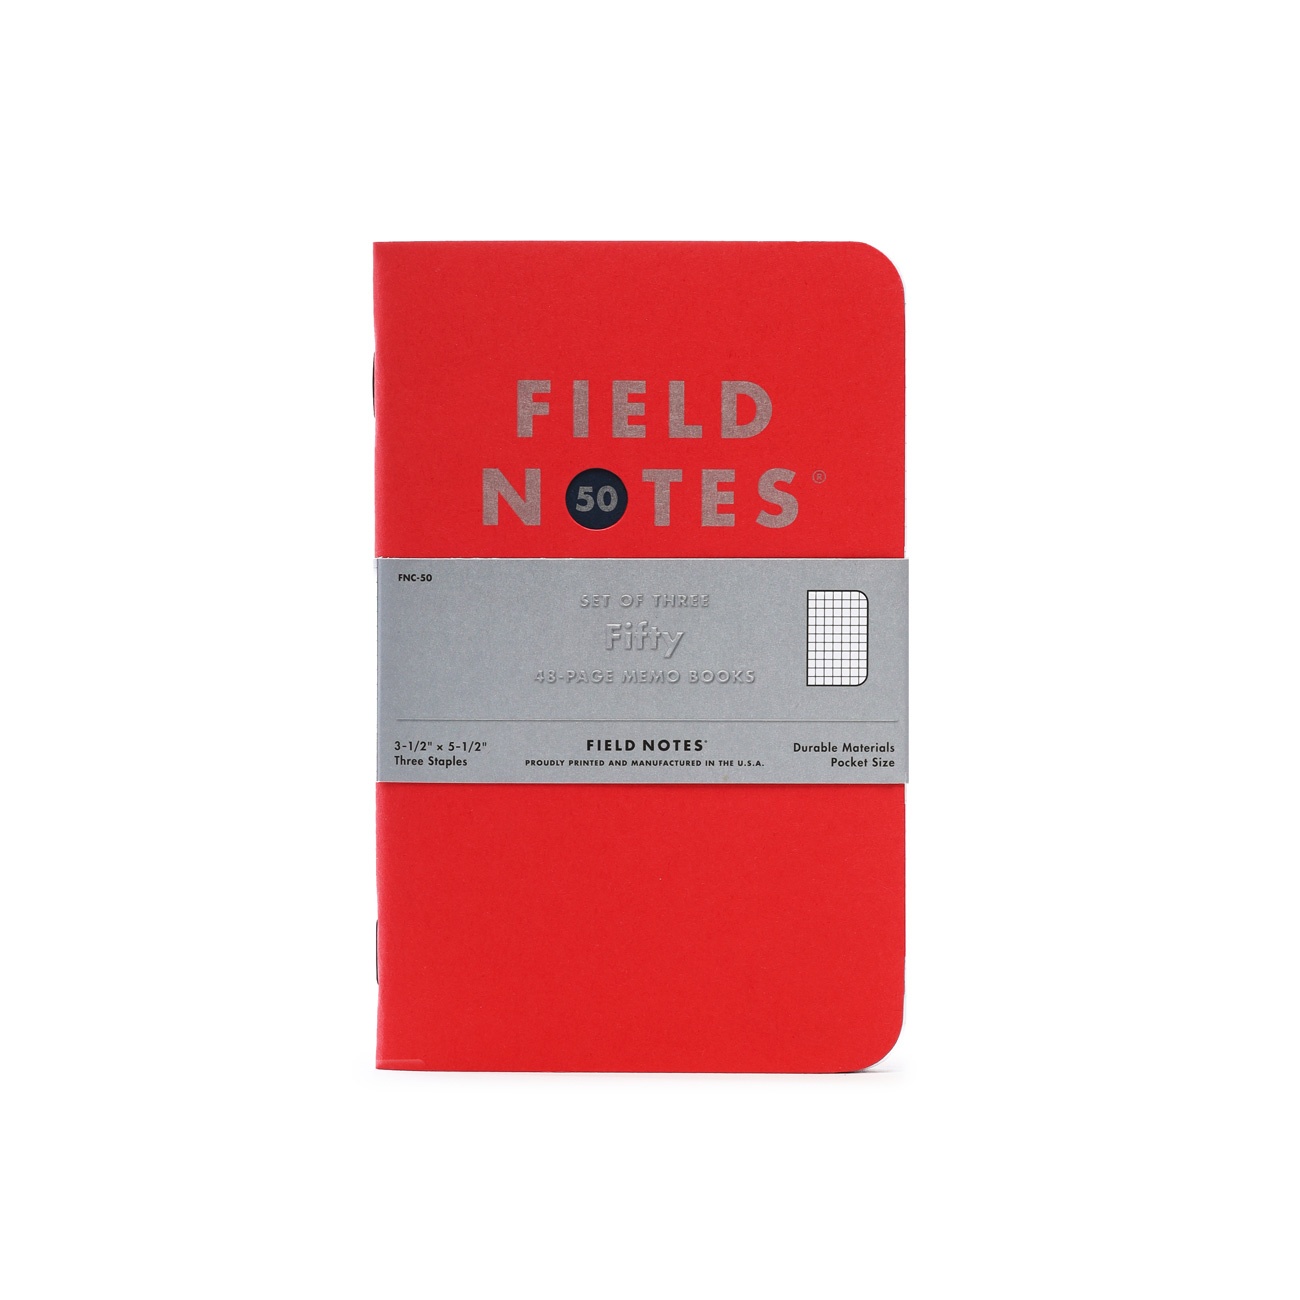 FIELD NOTES – FIFTY